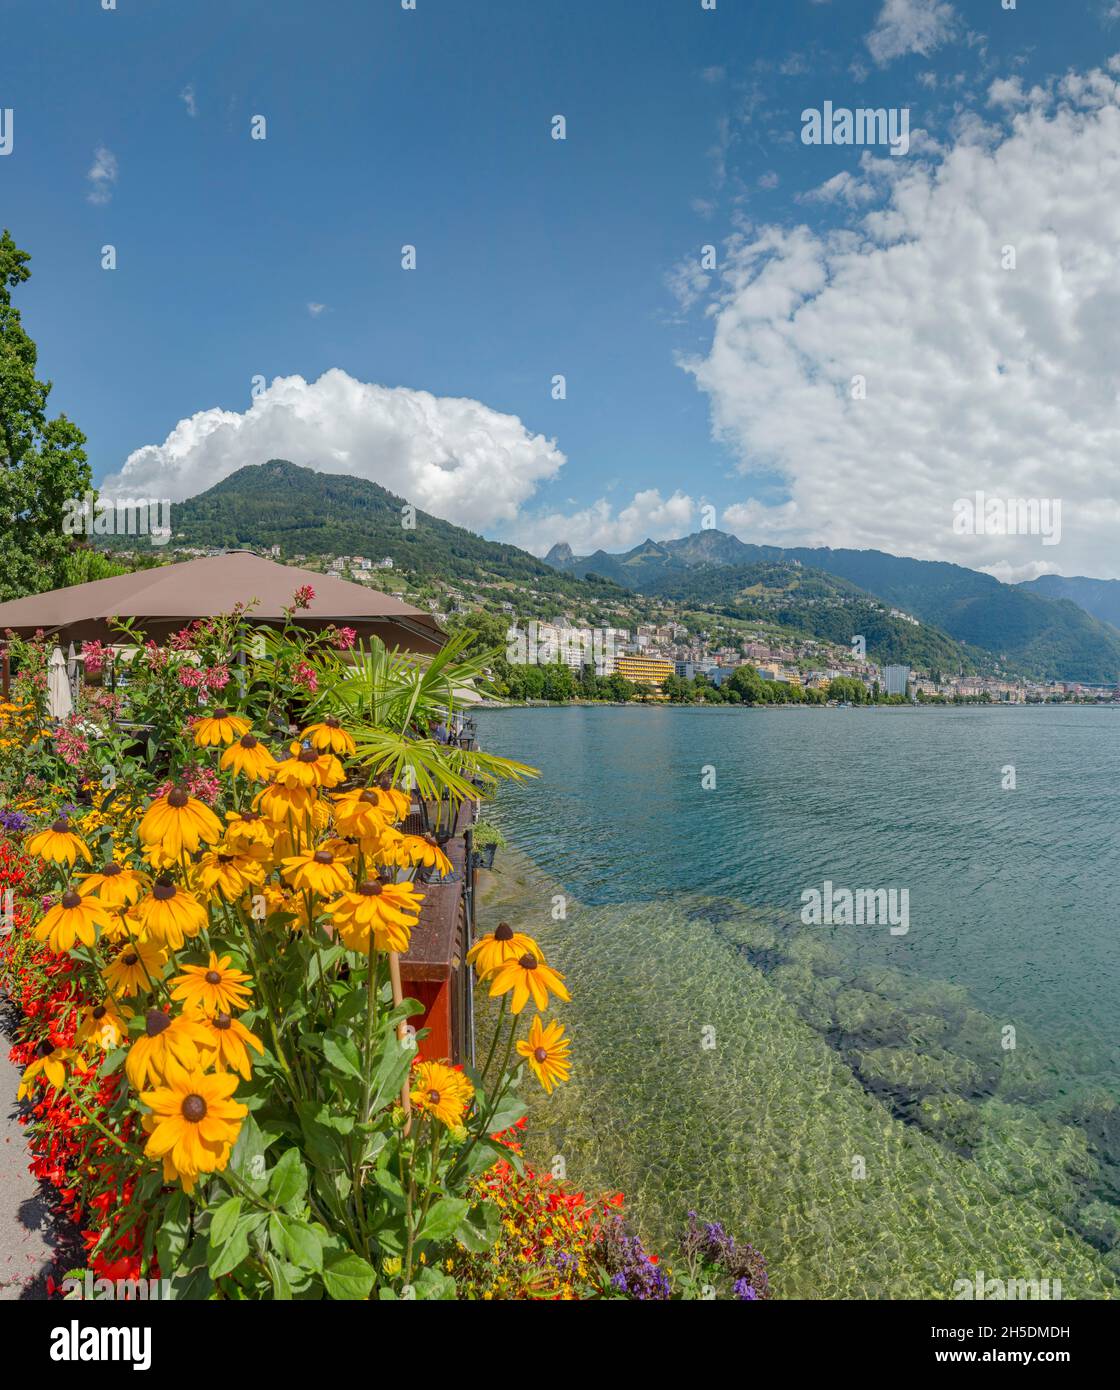 Flower box at the promenade along Lac Léman *** Local Caption ***  Clarens, Switzerland, city, village, water, flowers, summer, mountains, lake, Stock Photo